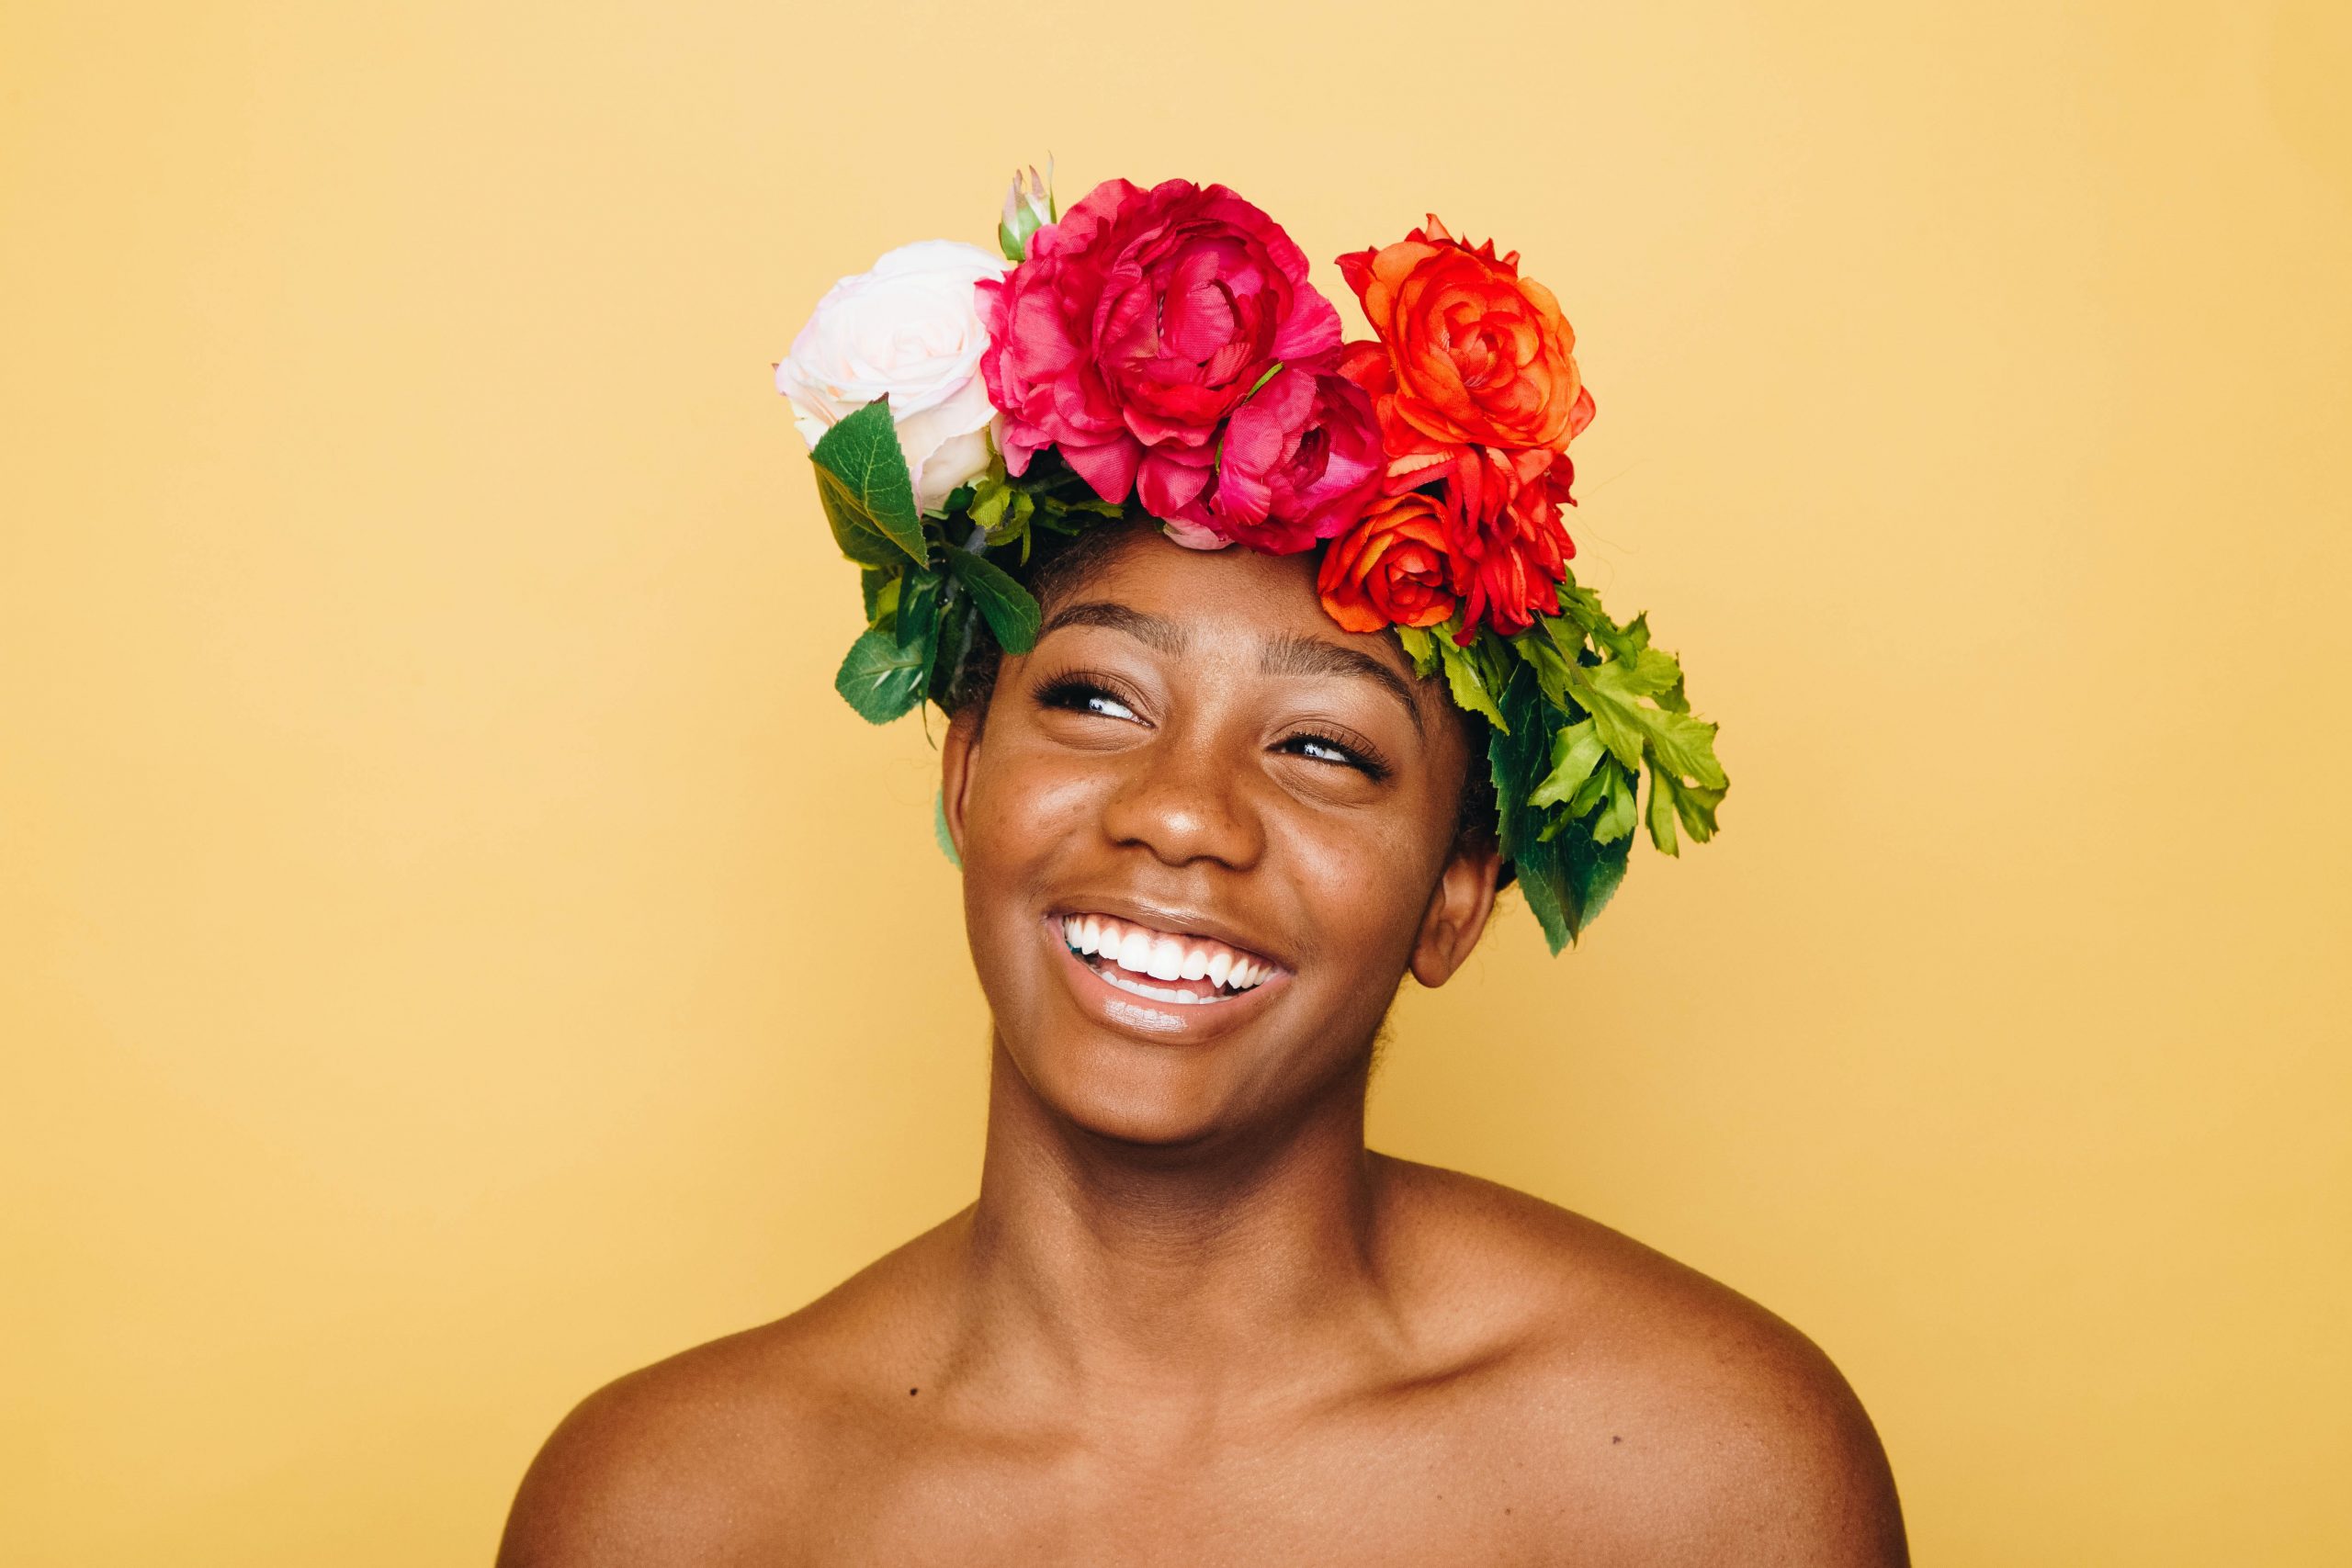 Confidence, a young woman with a headband made of flowers smiles and looks happy